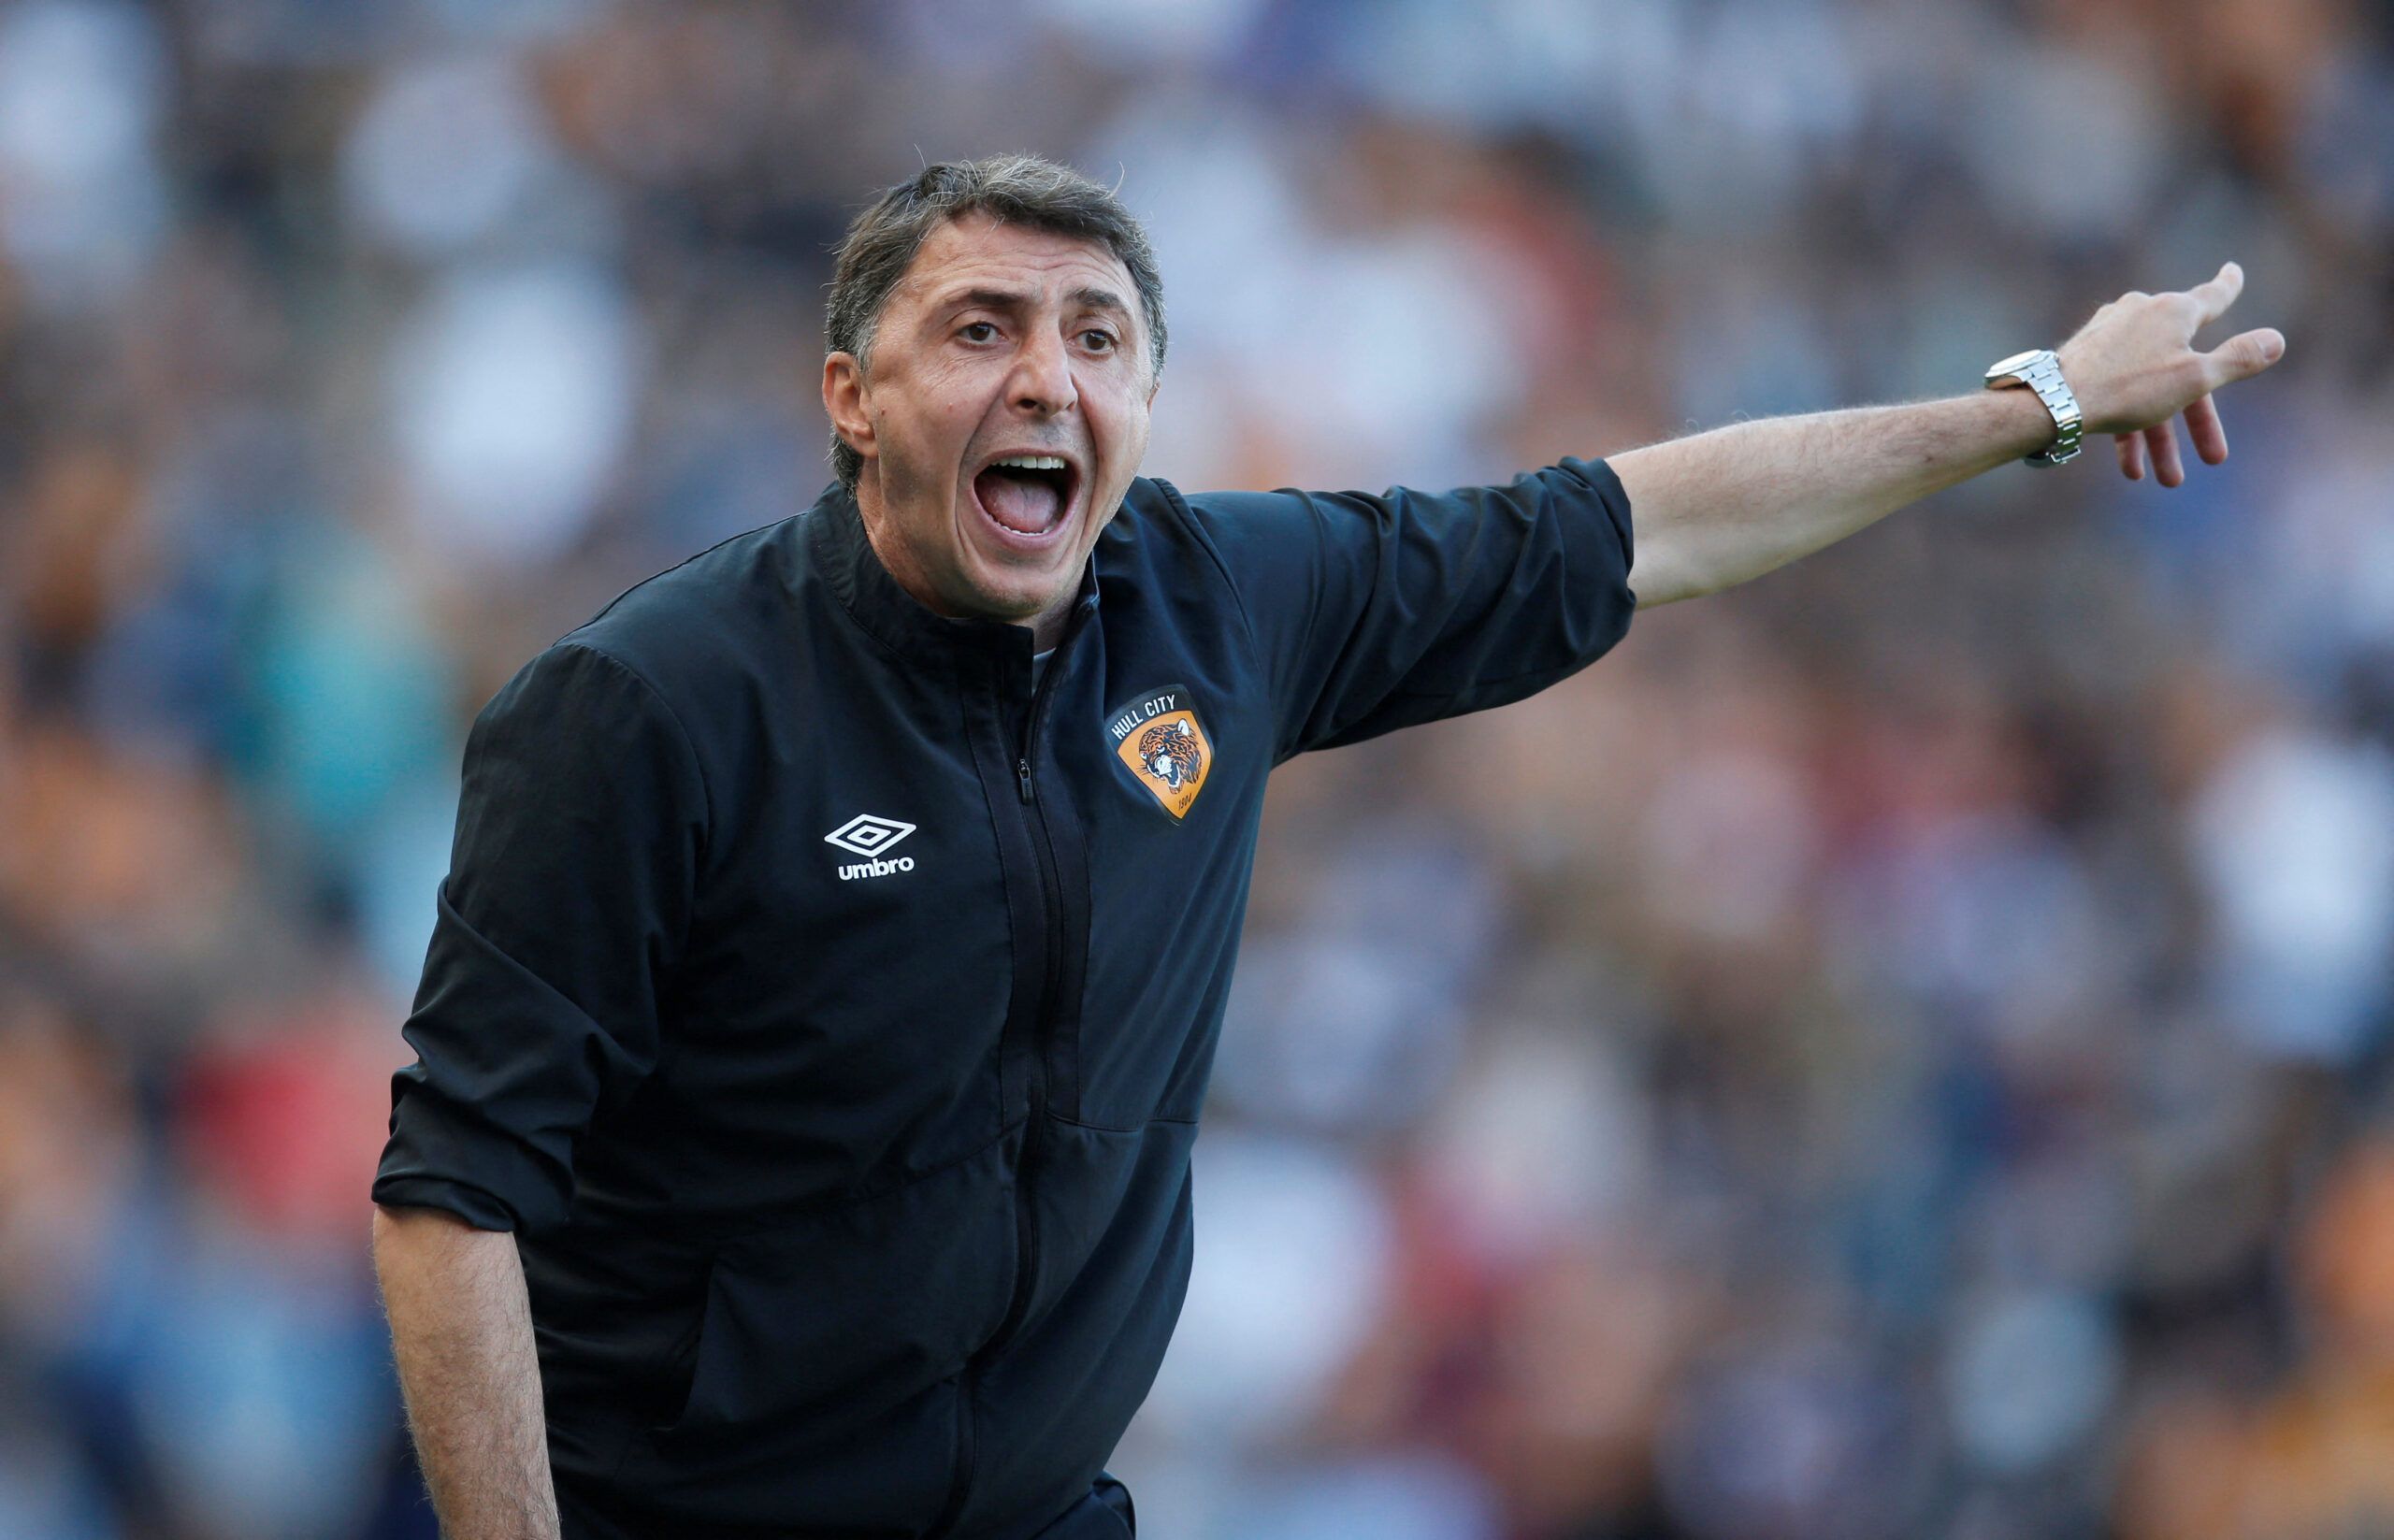 Soccer Football - Championship - Hull City v Coventry City - MKM Stadium, Hull, Britain - August 27, 2022 Hull City manager Shota Arveladze reacts Action Images/Ed Sykes EDITORIAL USE ONLY. No use with unauthorized audio, video, data, fixture lists, club/league logos or 